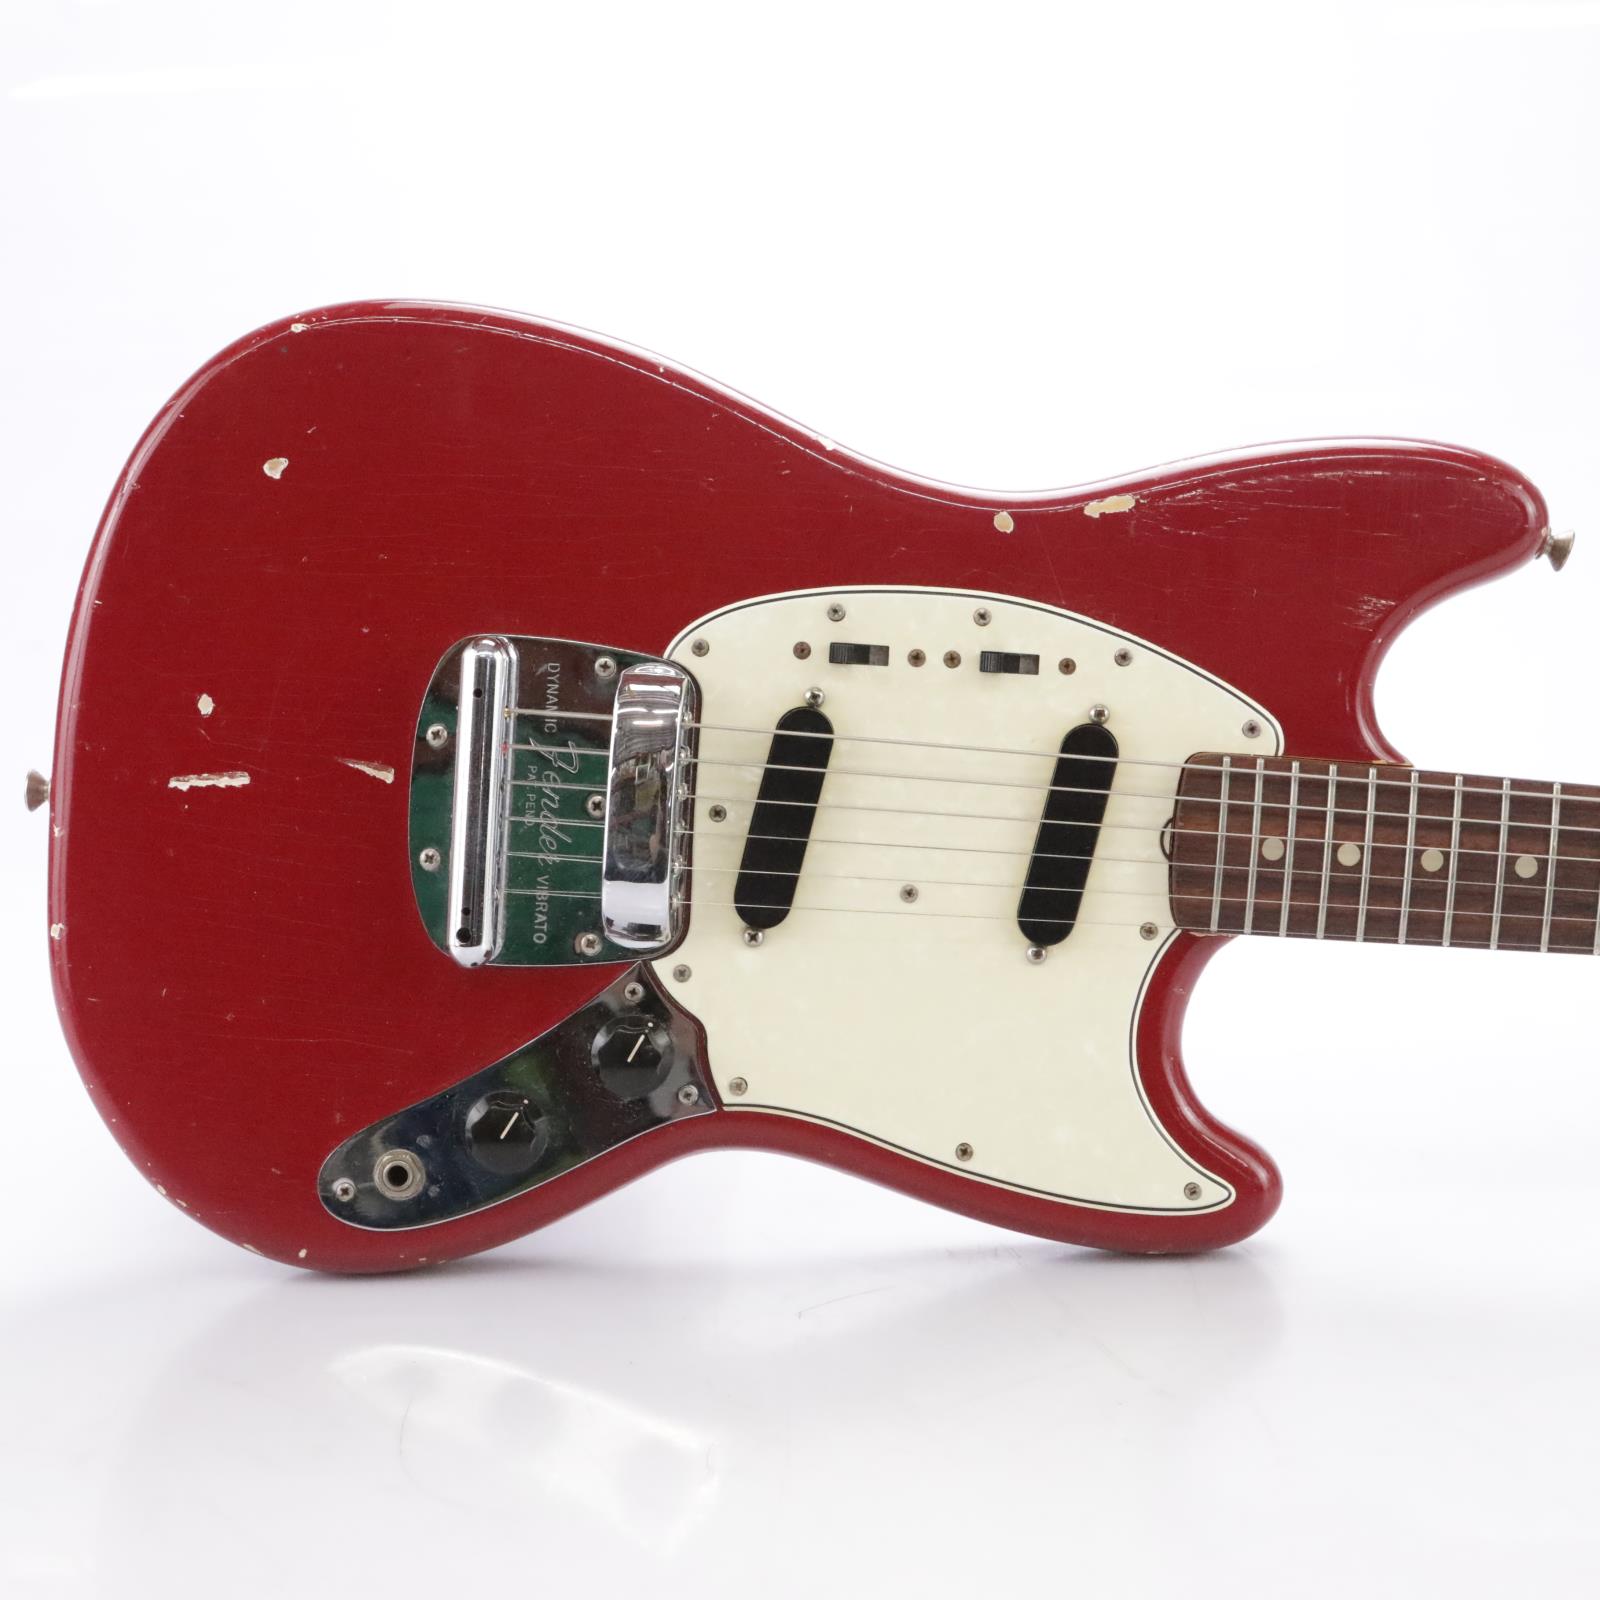 1966 Fender Mustang Electric Guitar Dakota Red w/ Mystery Autograph #43820